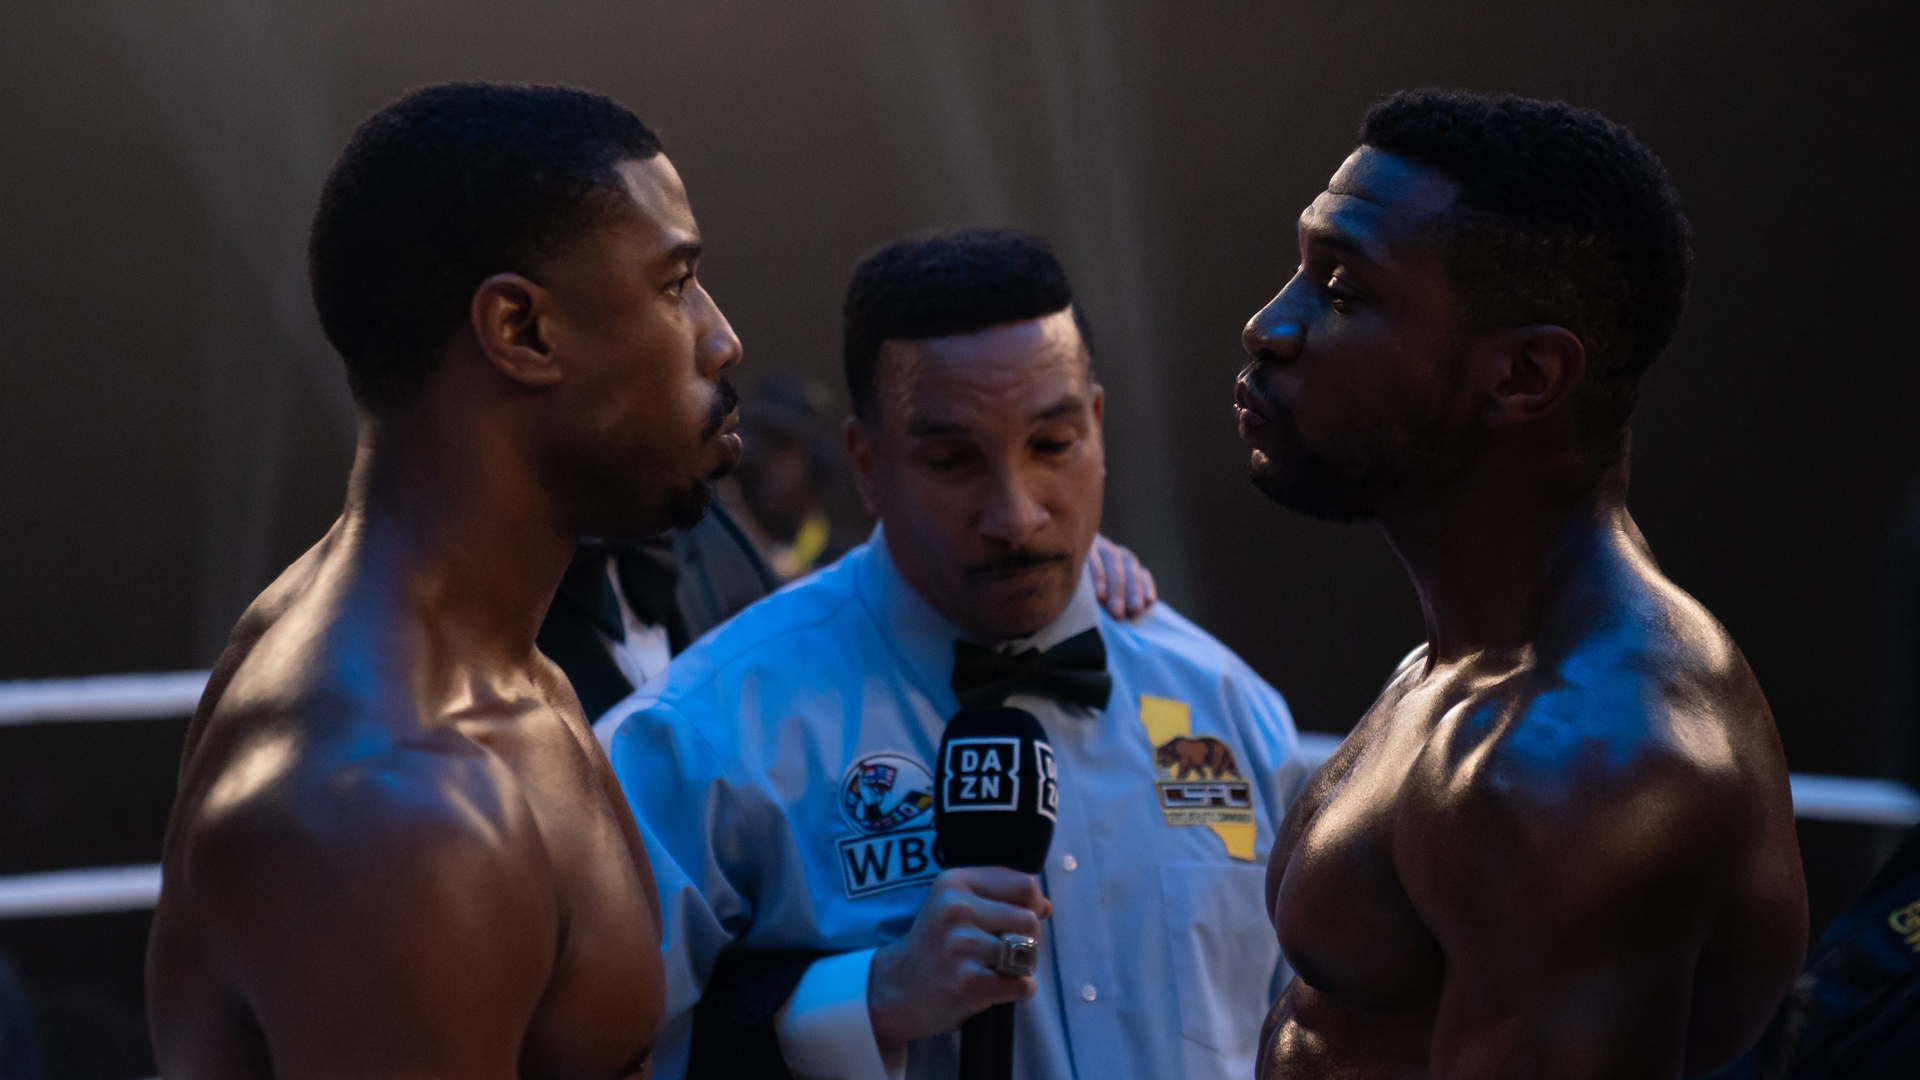 Adonis Creed and Damian Anderson face off in Creed 3